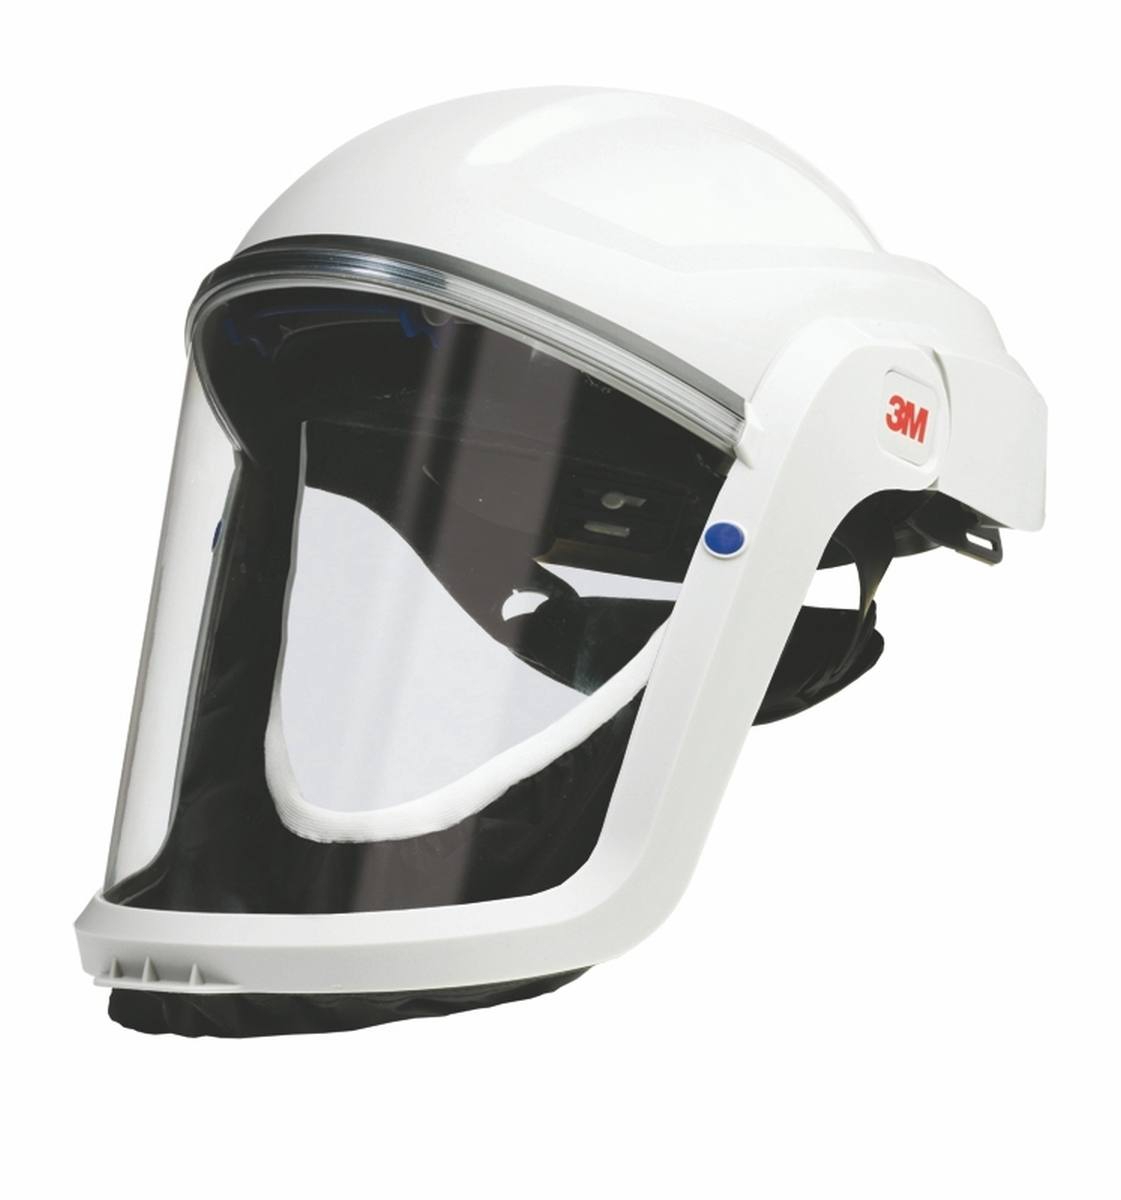 3M TR-315E+ Versaflo starter pack incl. TR-302E, accessories and 3M Versaflo Safety helmet M206 with comfort face seal and polycarbonate visor, clear